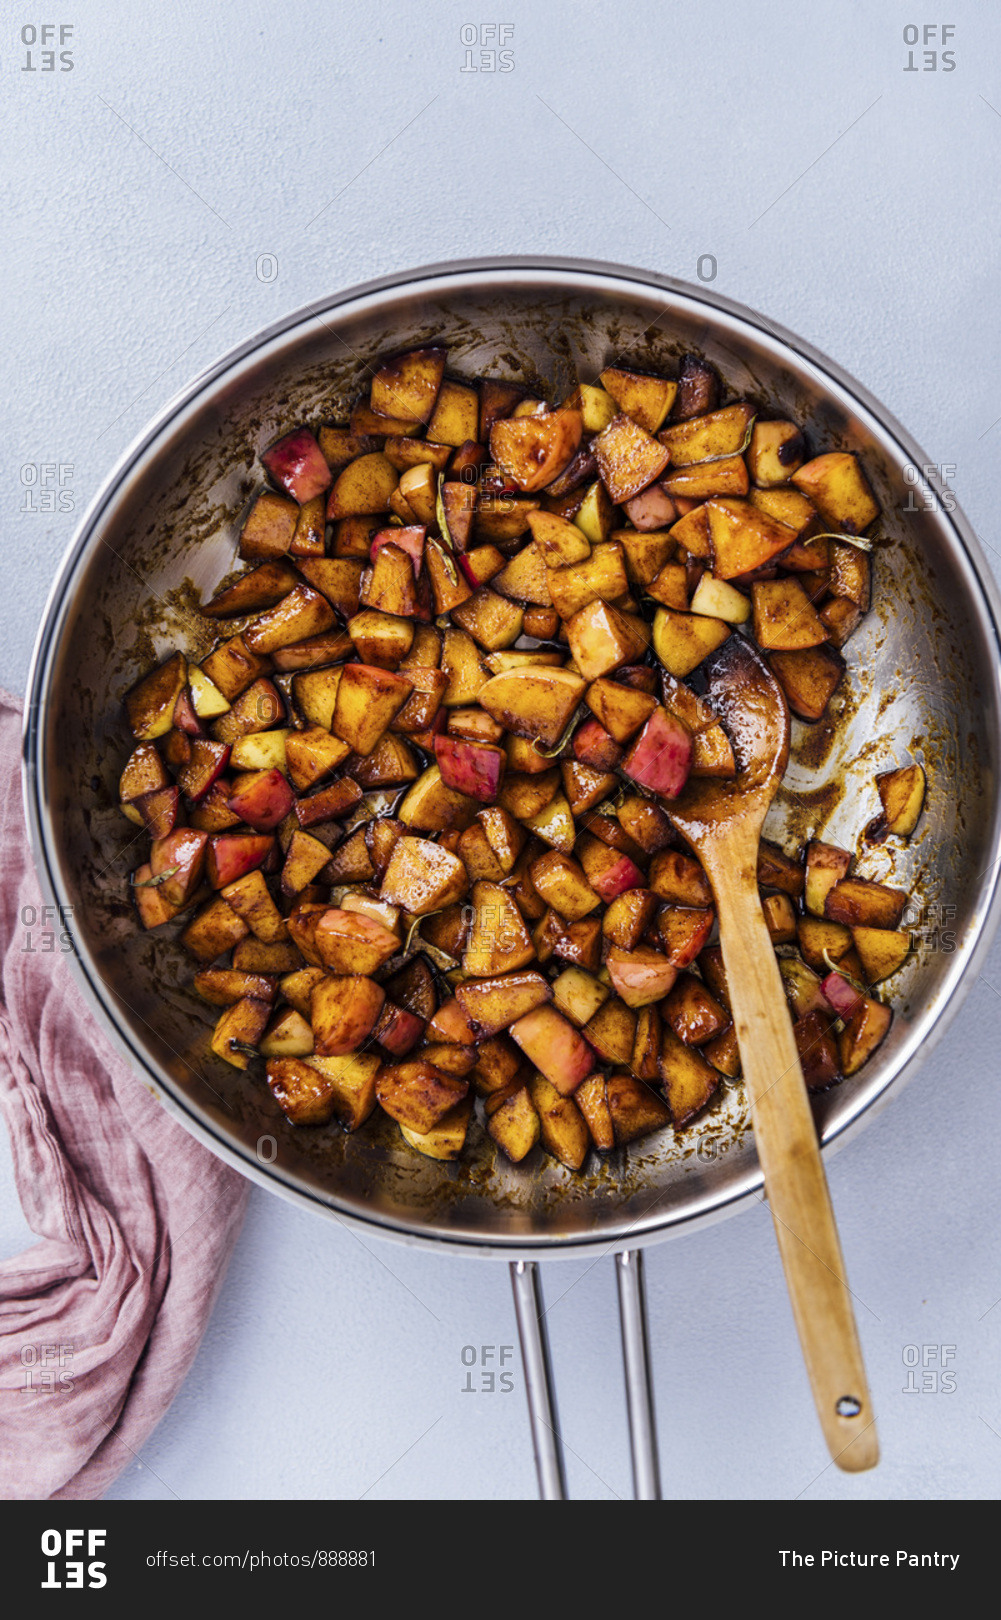 Cooking spiced diced apples with butter and brown sugar in a pan.